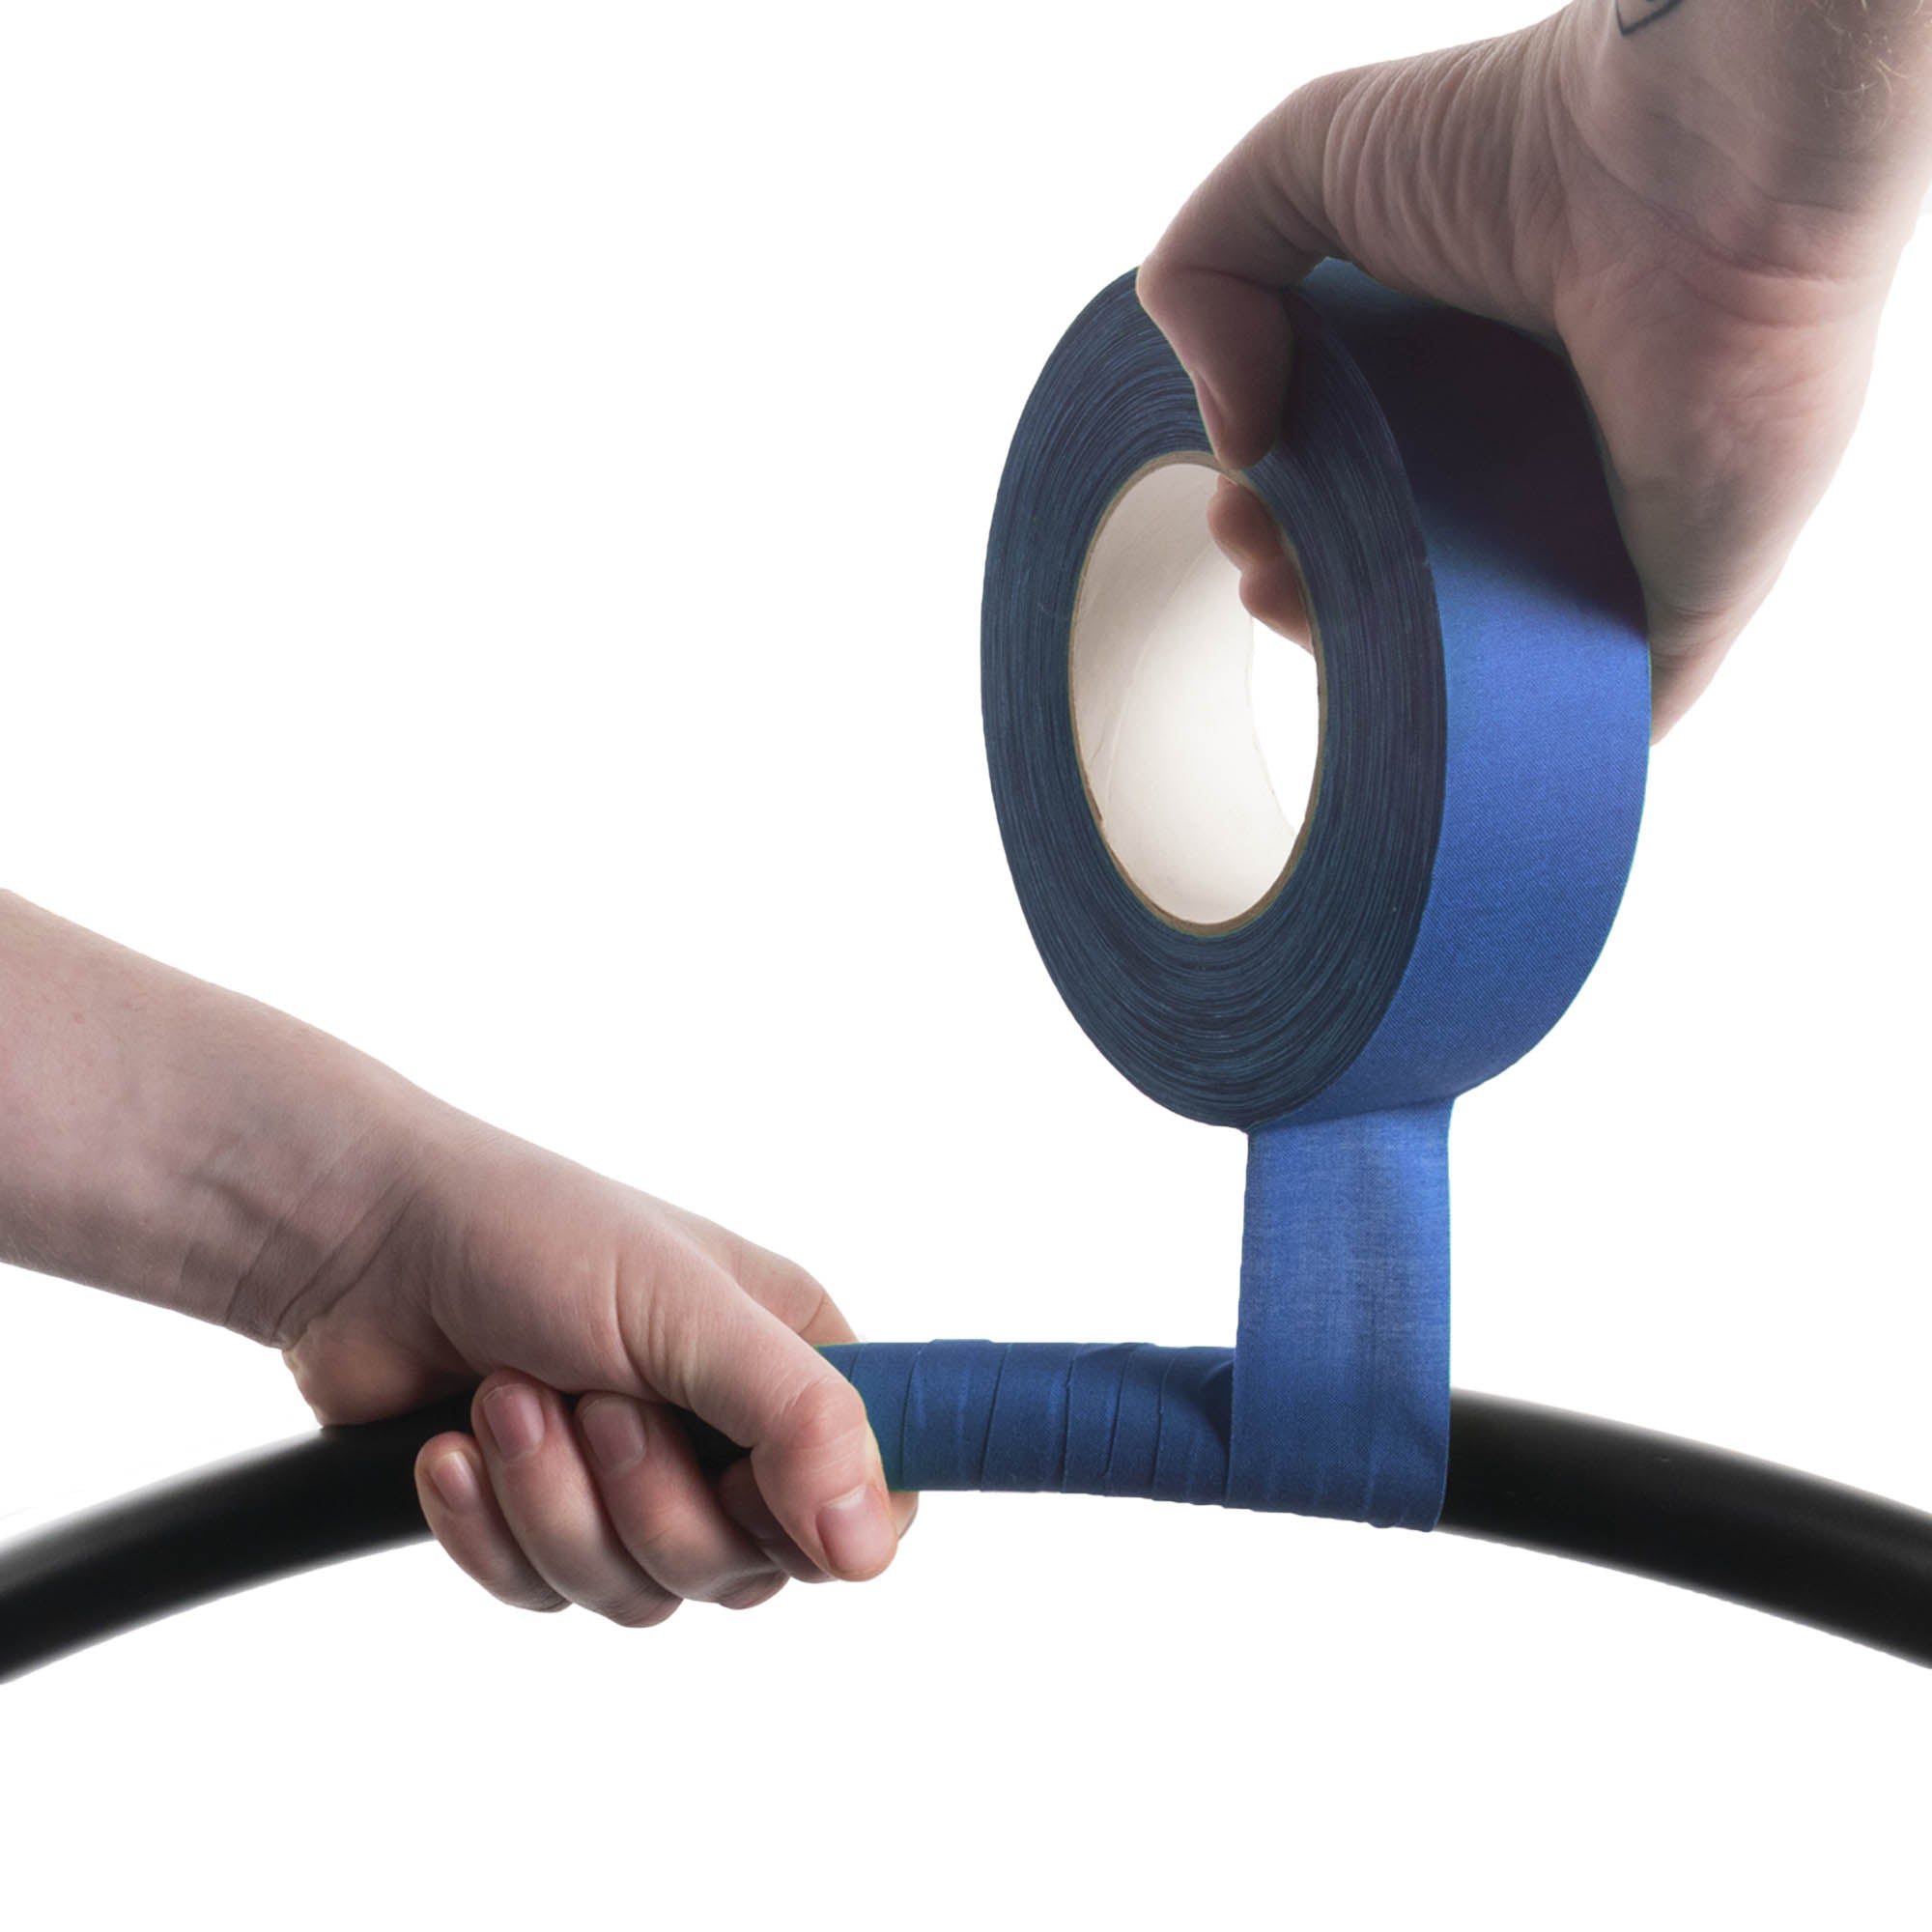 taping a hoop with blue 3.8cm wide